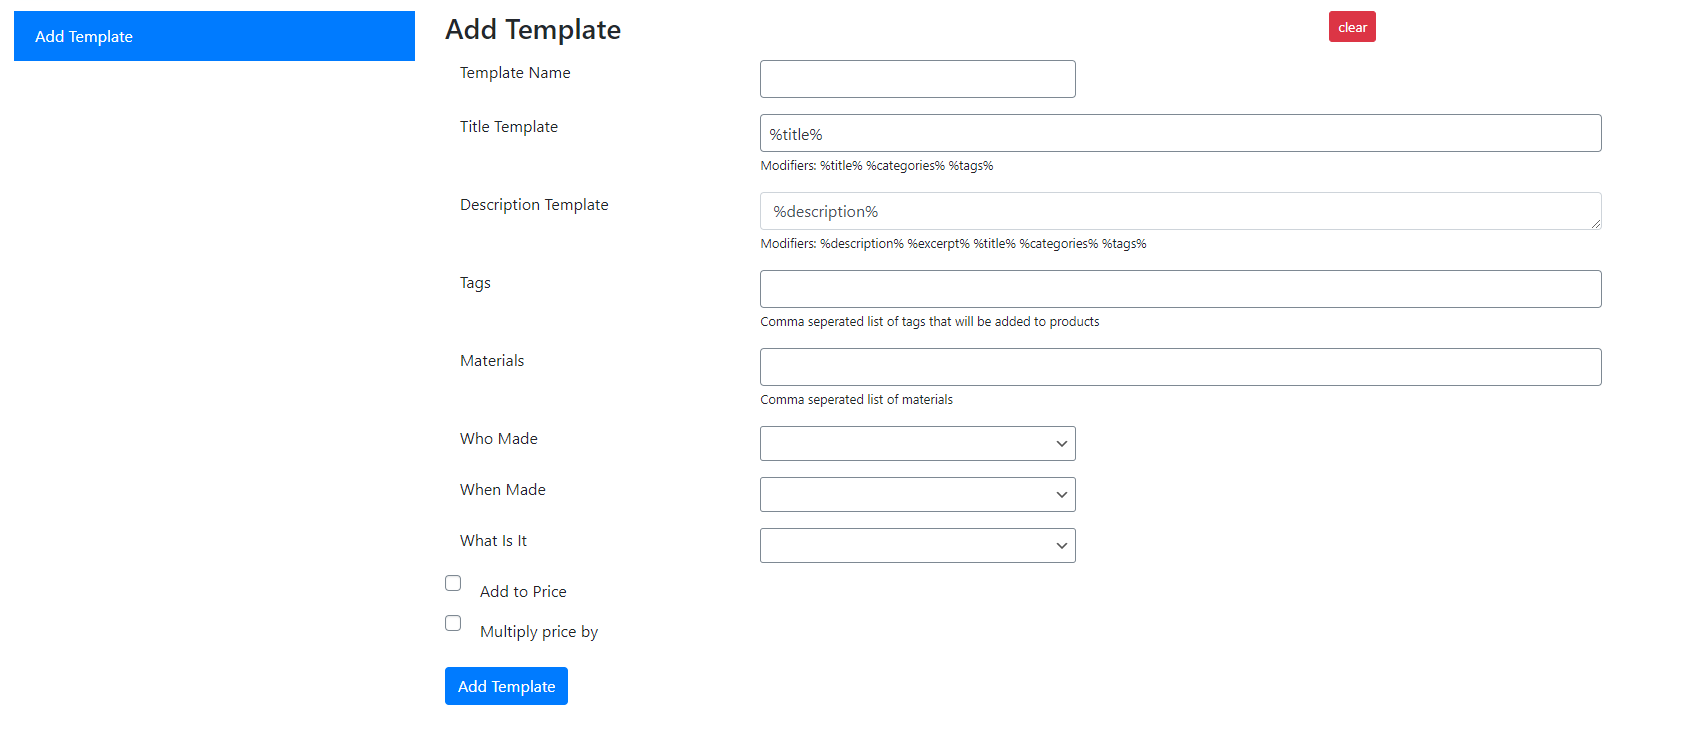 Platy Syncer enables you to create templates for you products.